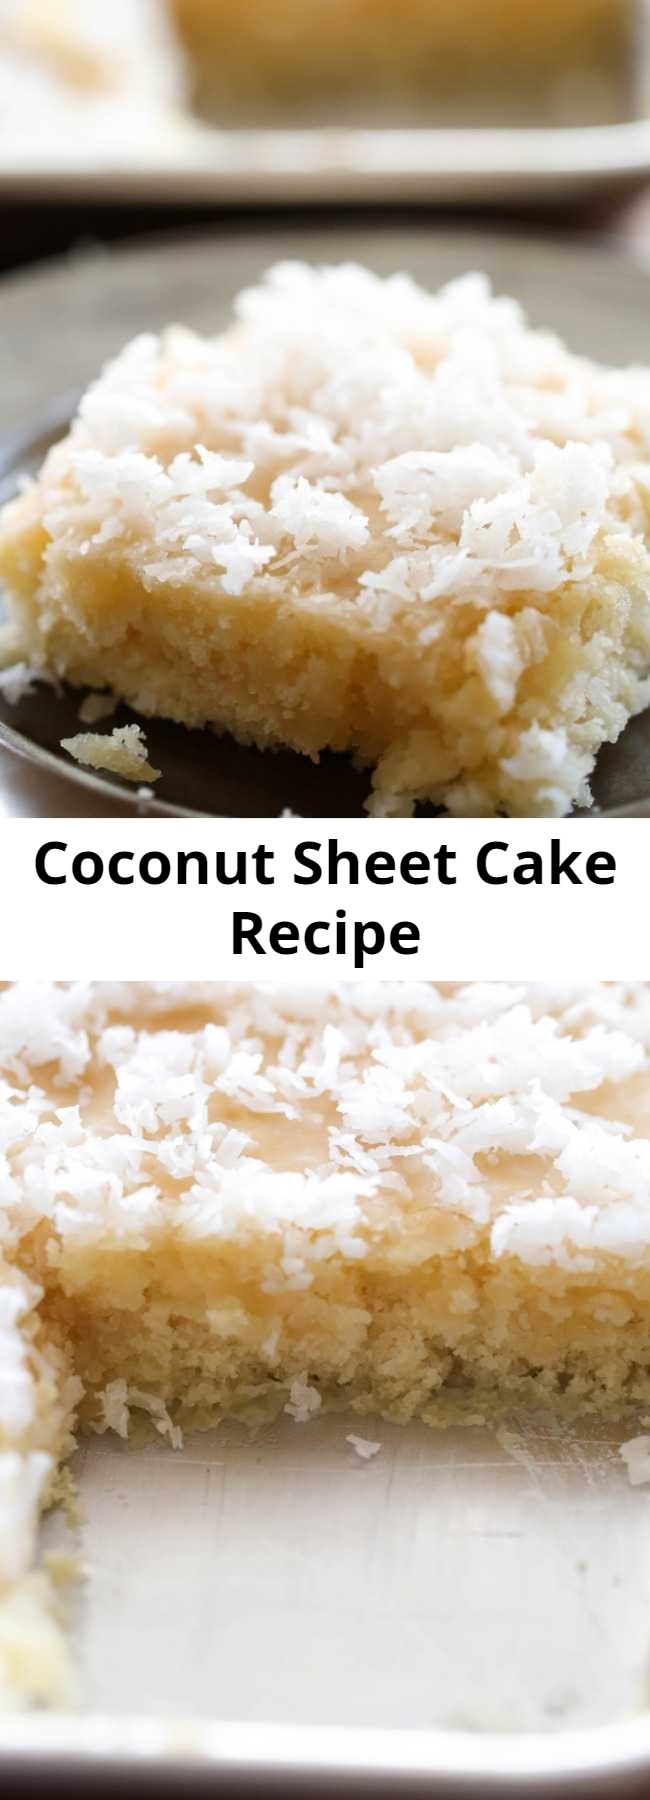 Super Simple Coconut Sheet Cake Recipe - This cake literally MELTS IN YOUR MOUTH!!! It is beyond delicious and super simple to make! One of my favorite cake recipes to date!